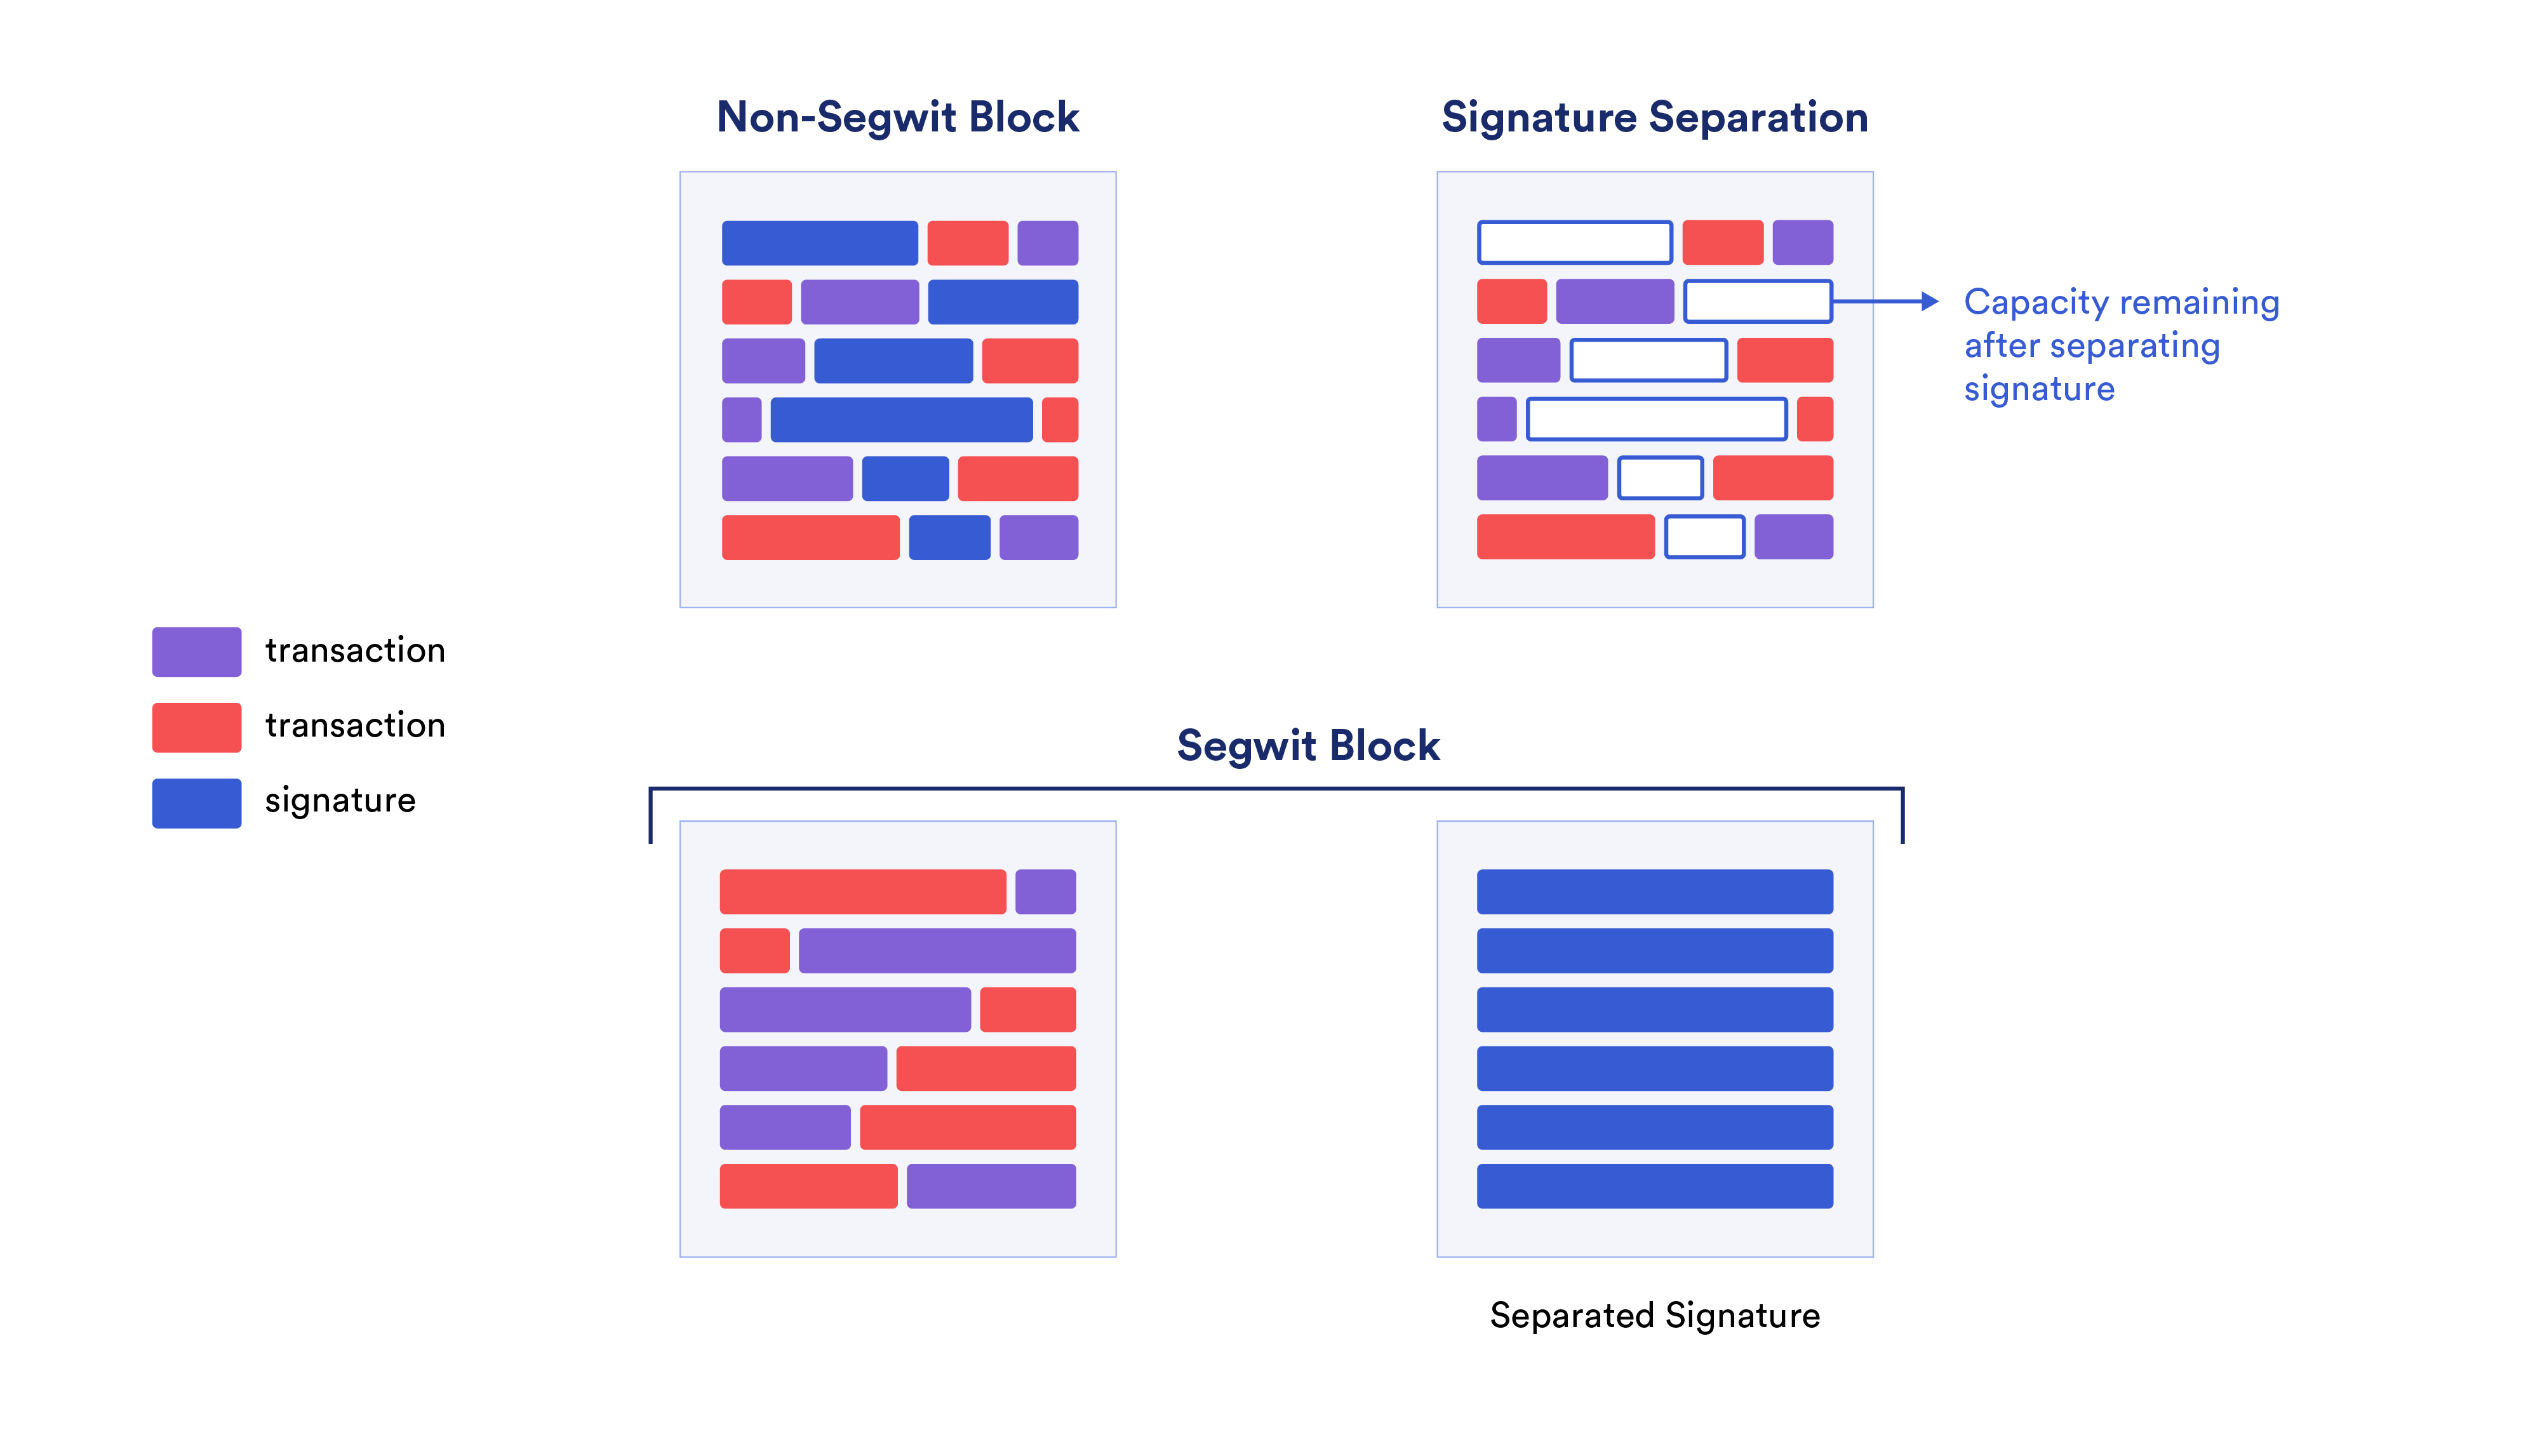 A diagram comparing the architecture of a non-SegWit block to a SegWit block. 